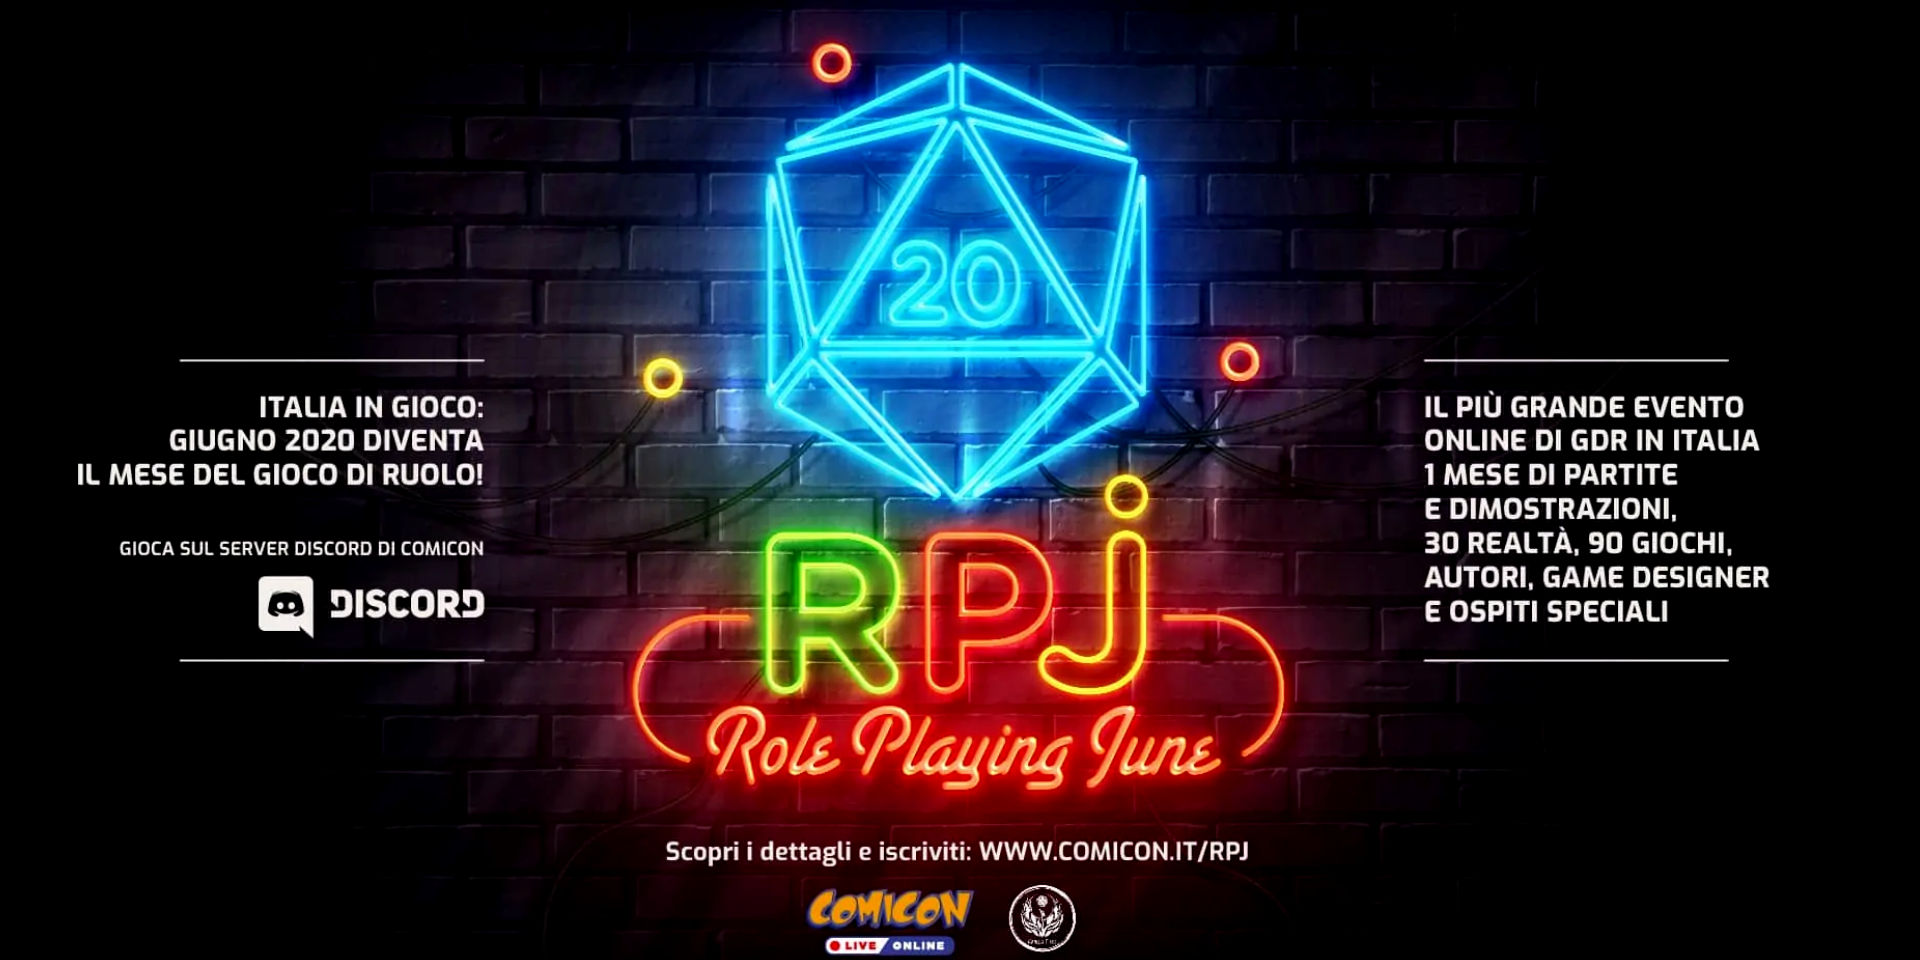 Role Playing June by Comicon